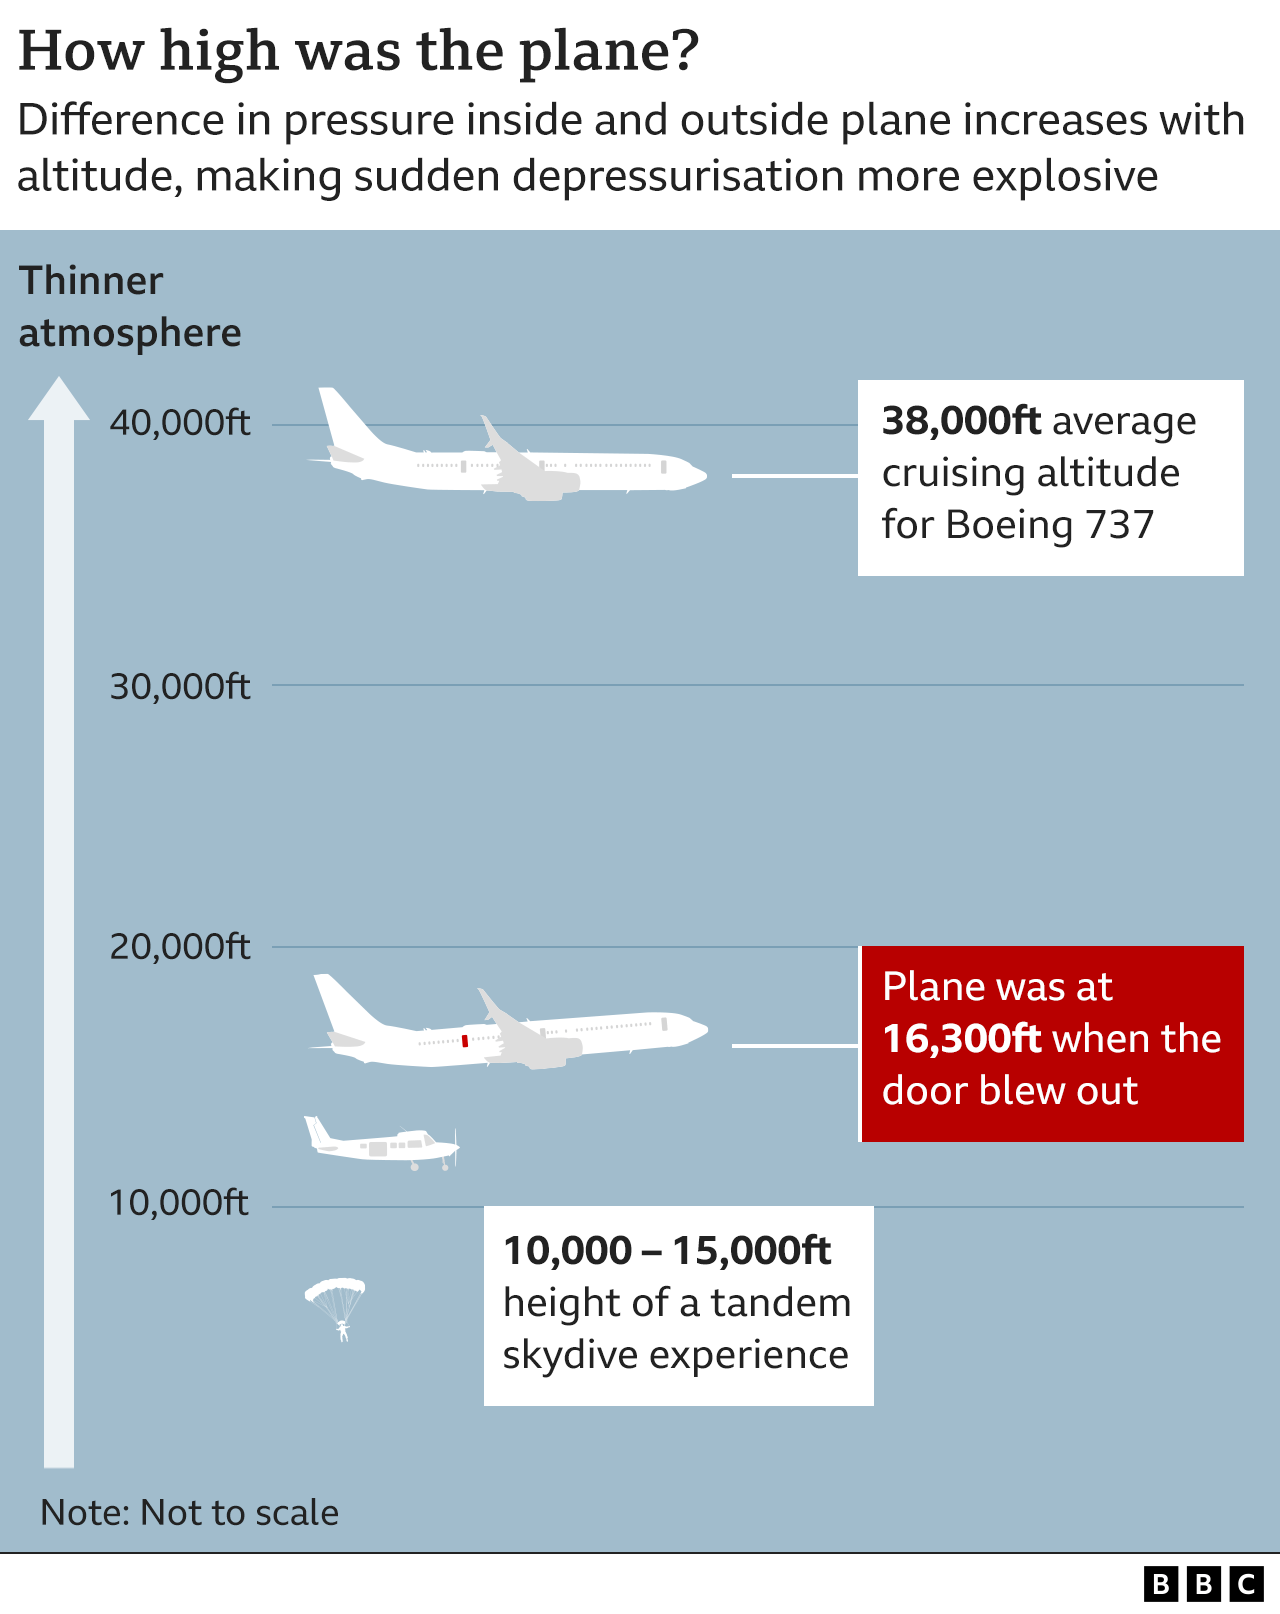 Diagram showing difference in plane pressurisation depending on altitude